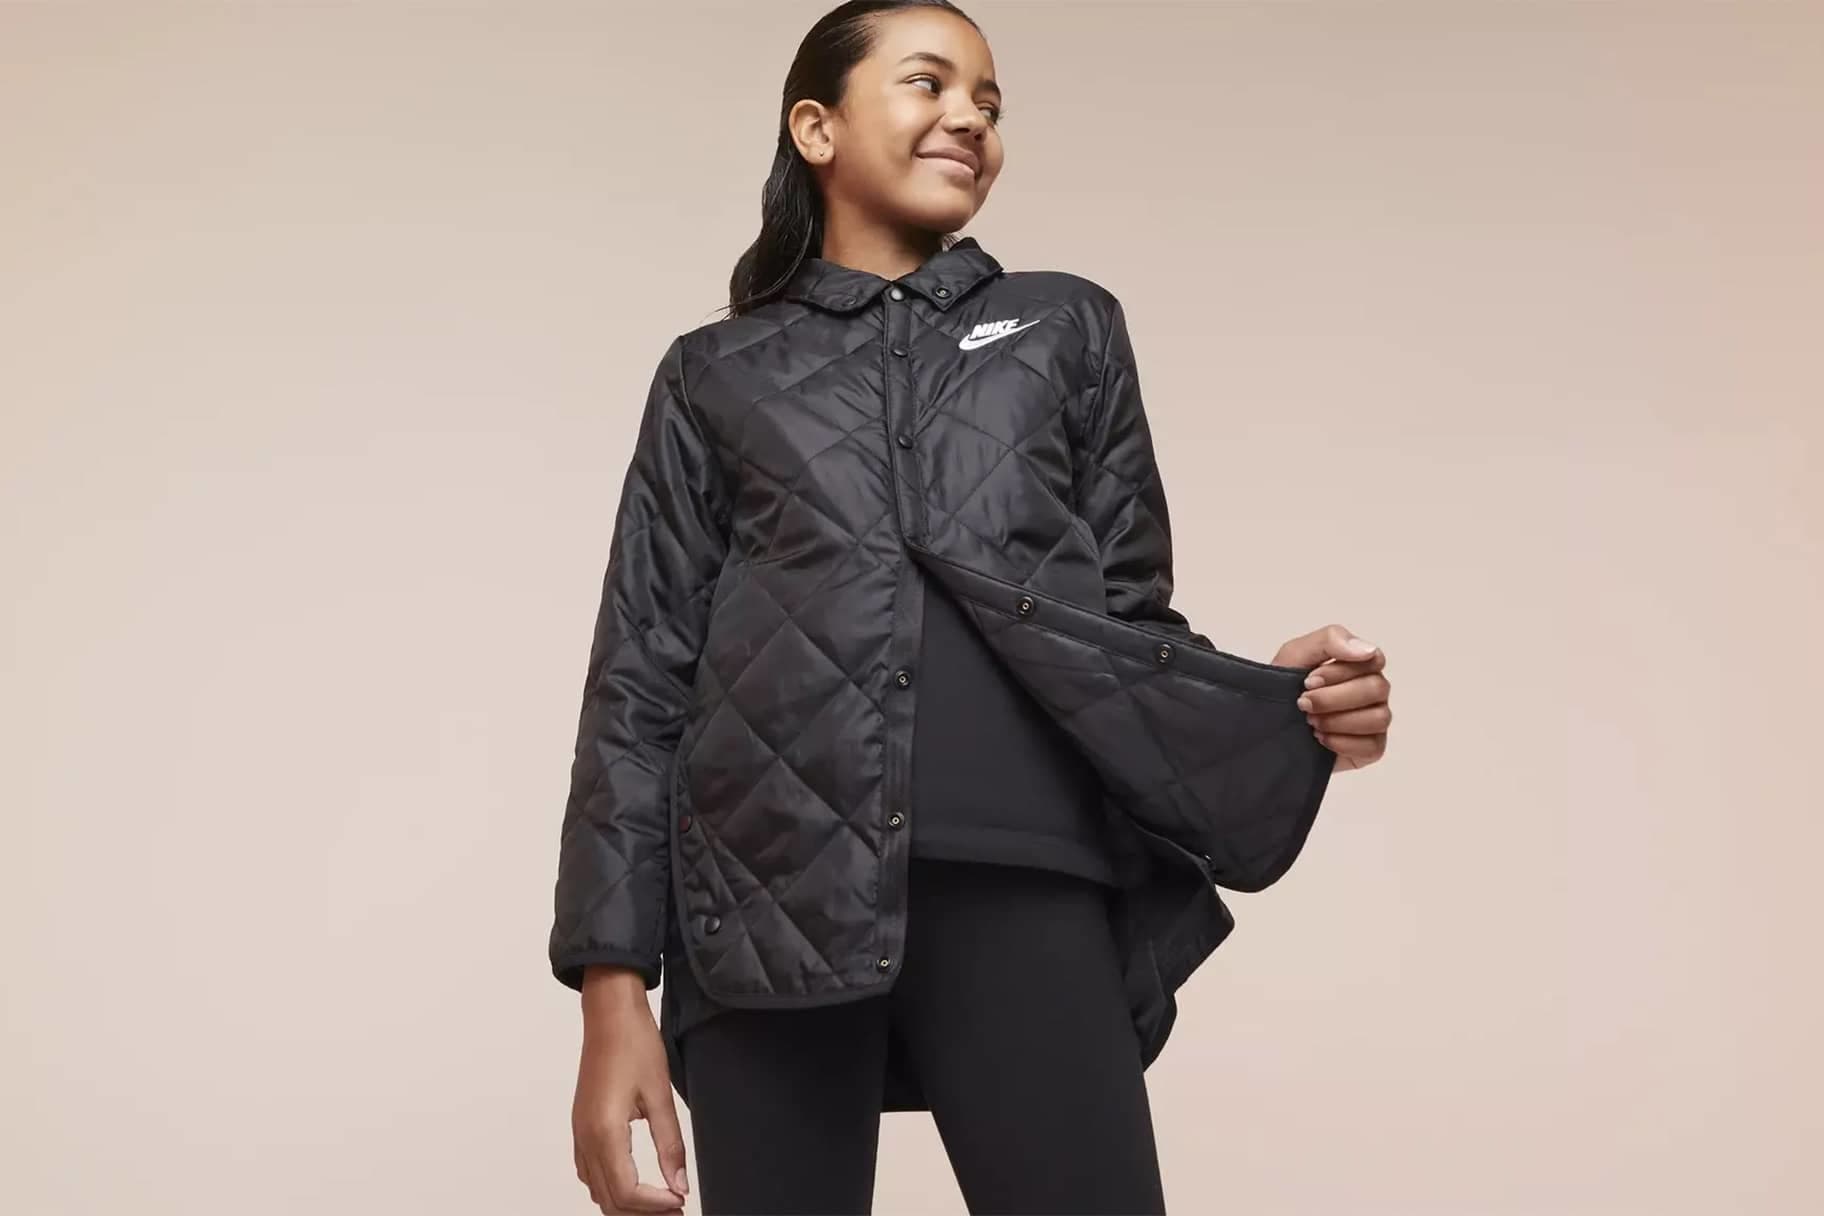 The Best Nike Jackets for Kids. Nike CH